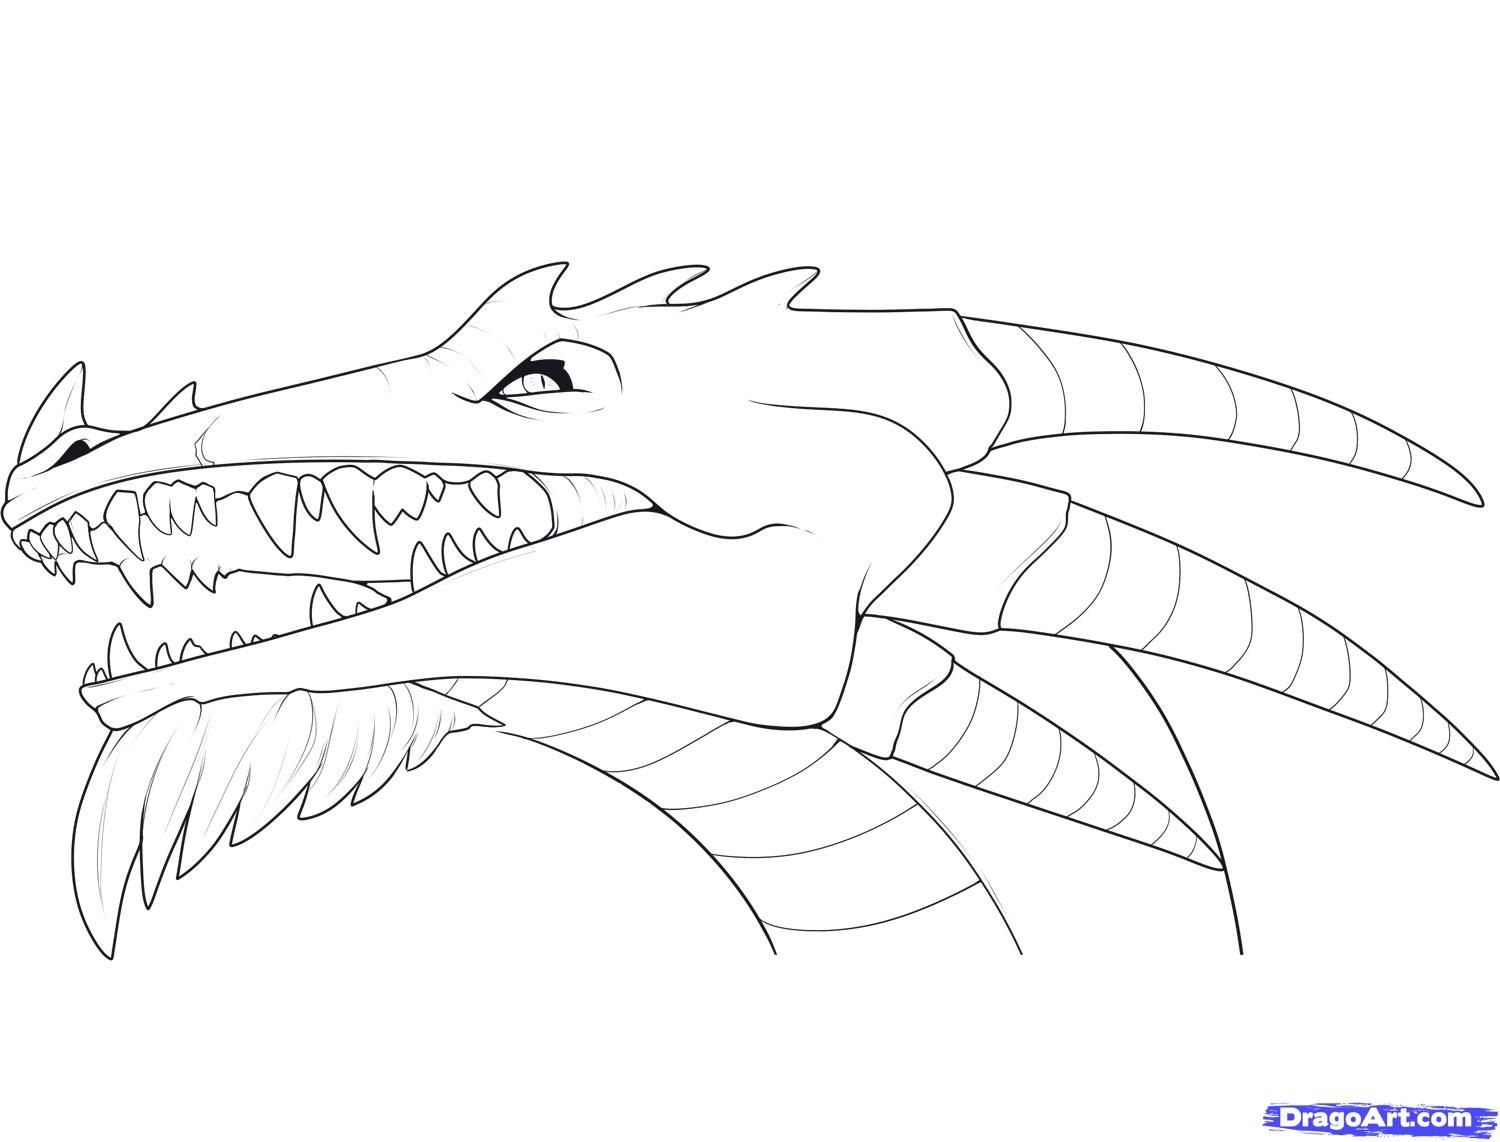 How To Draw Dragon Heads, Step By Step, Dragons, Draw A Dragon